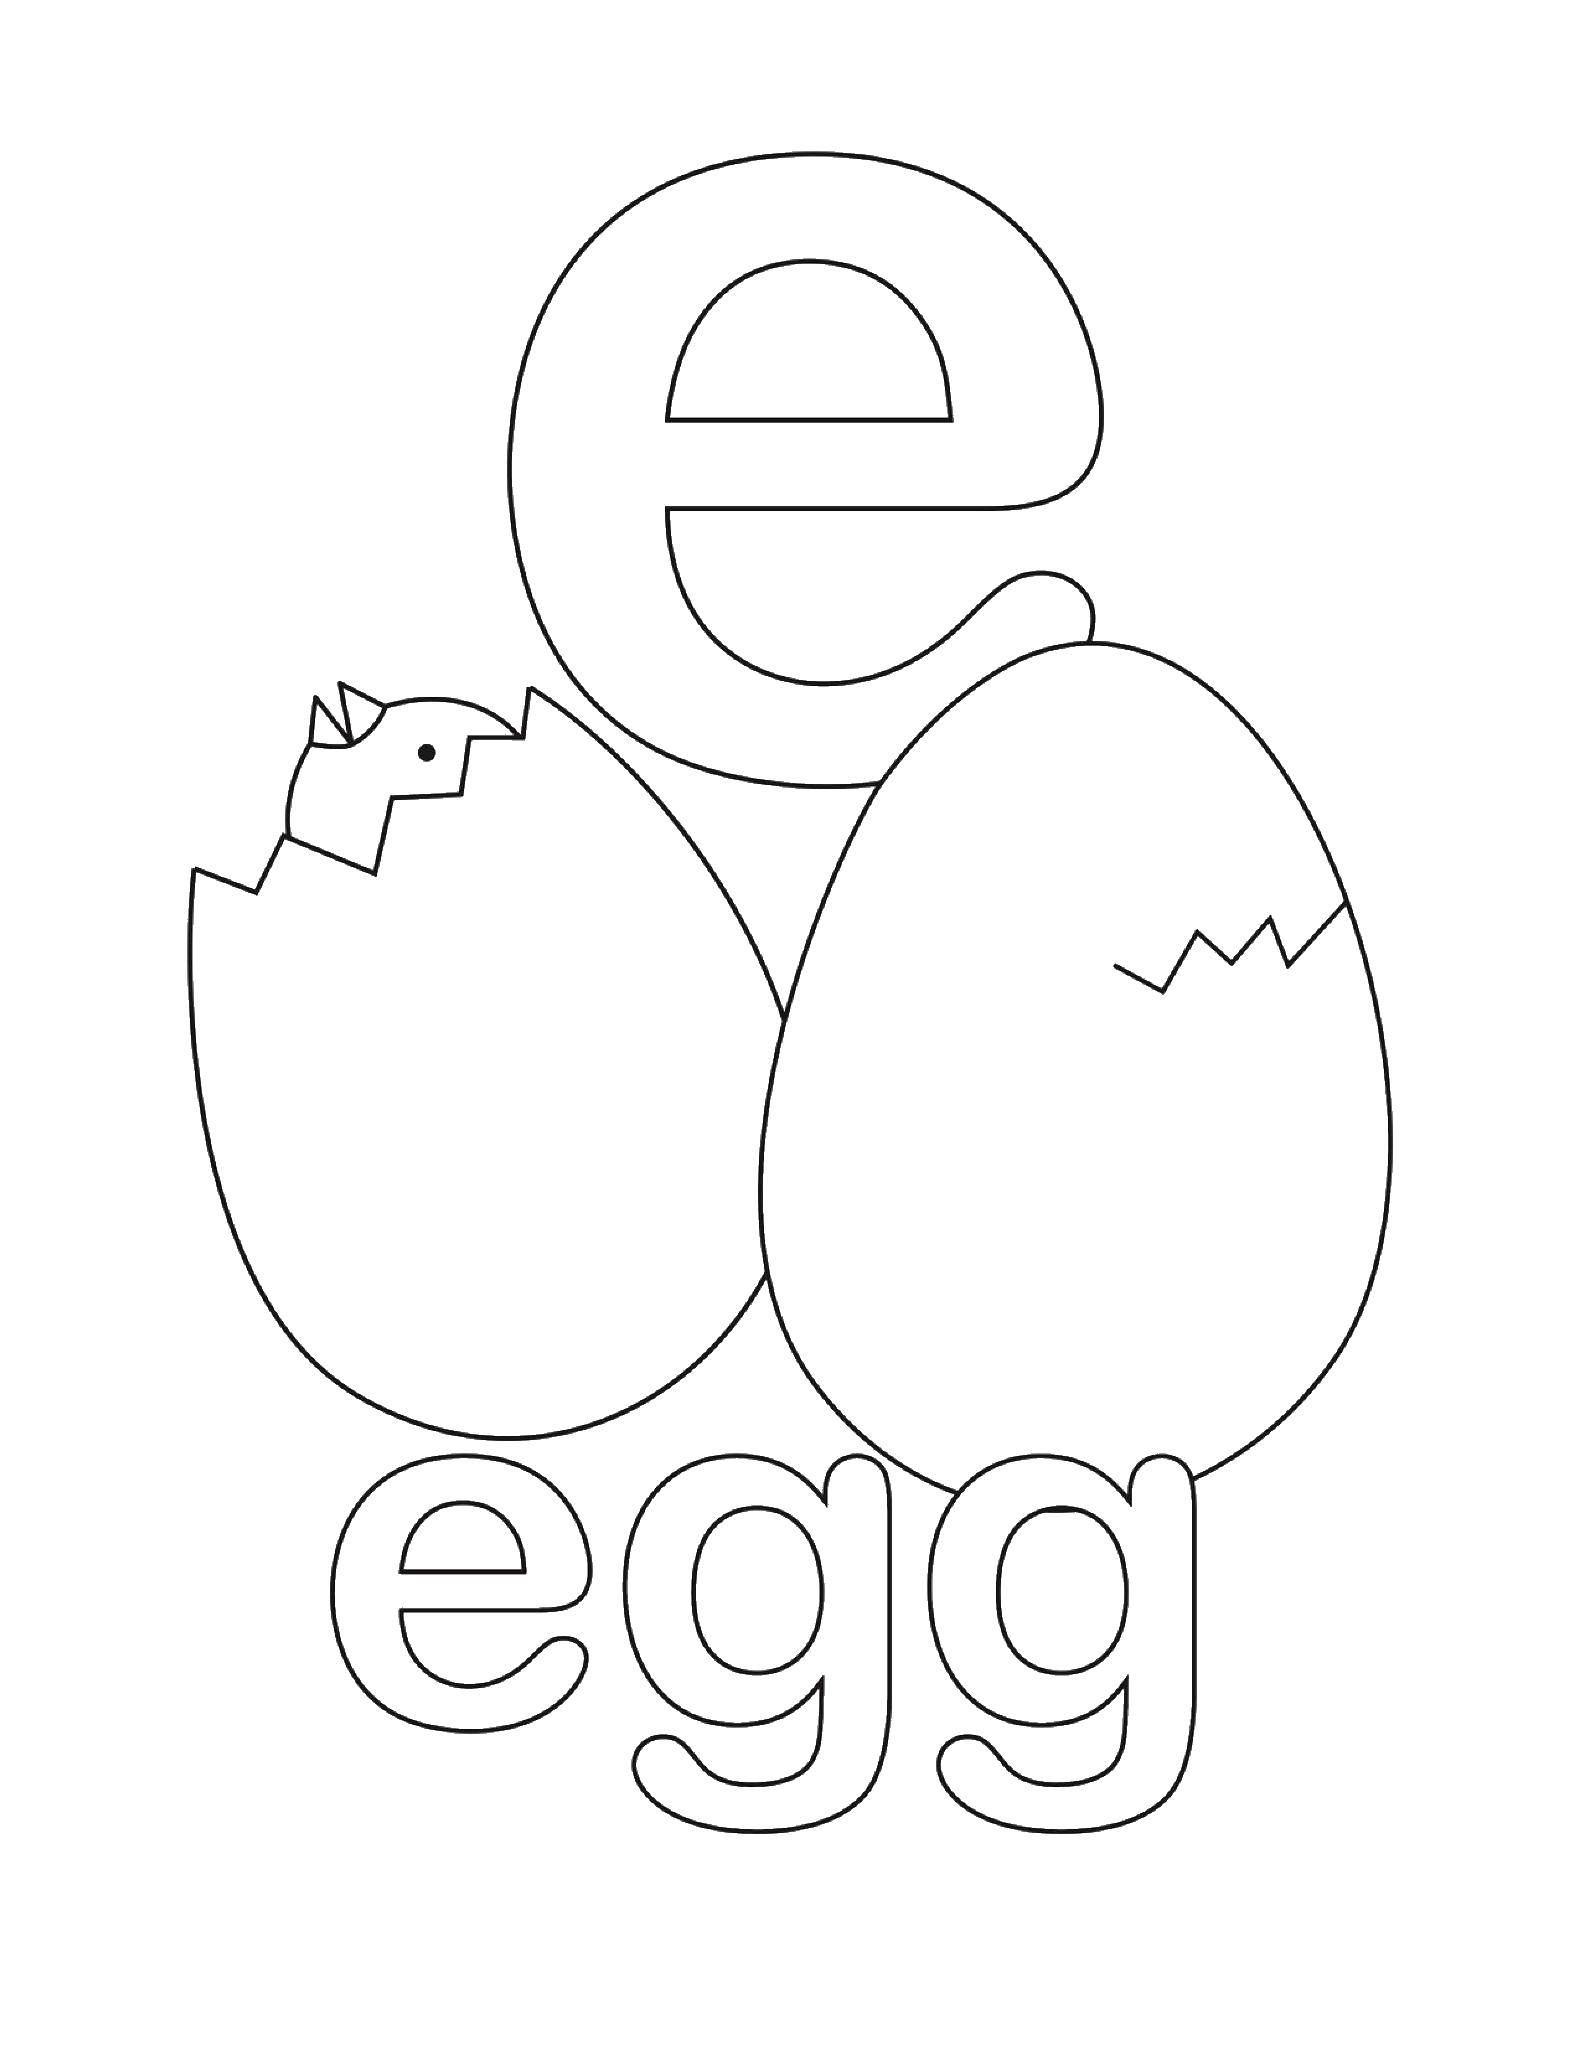 Coloring Egg. Category English words. Tags:  the English word, egg.